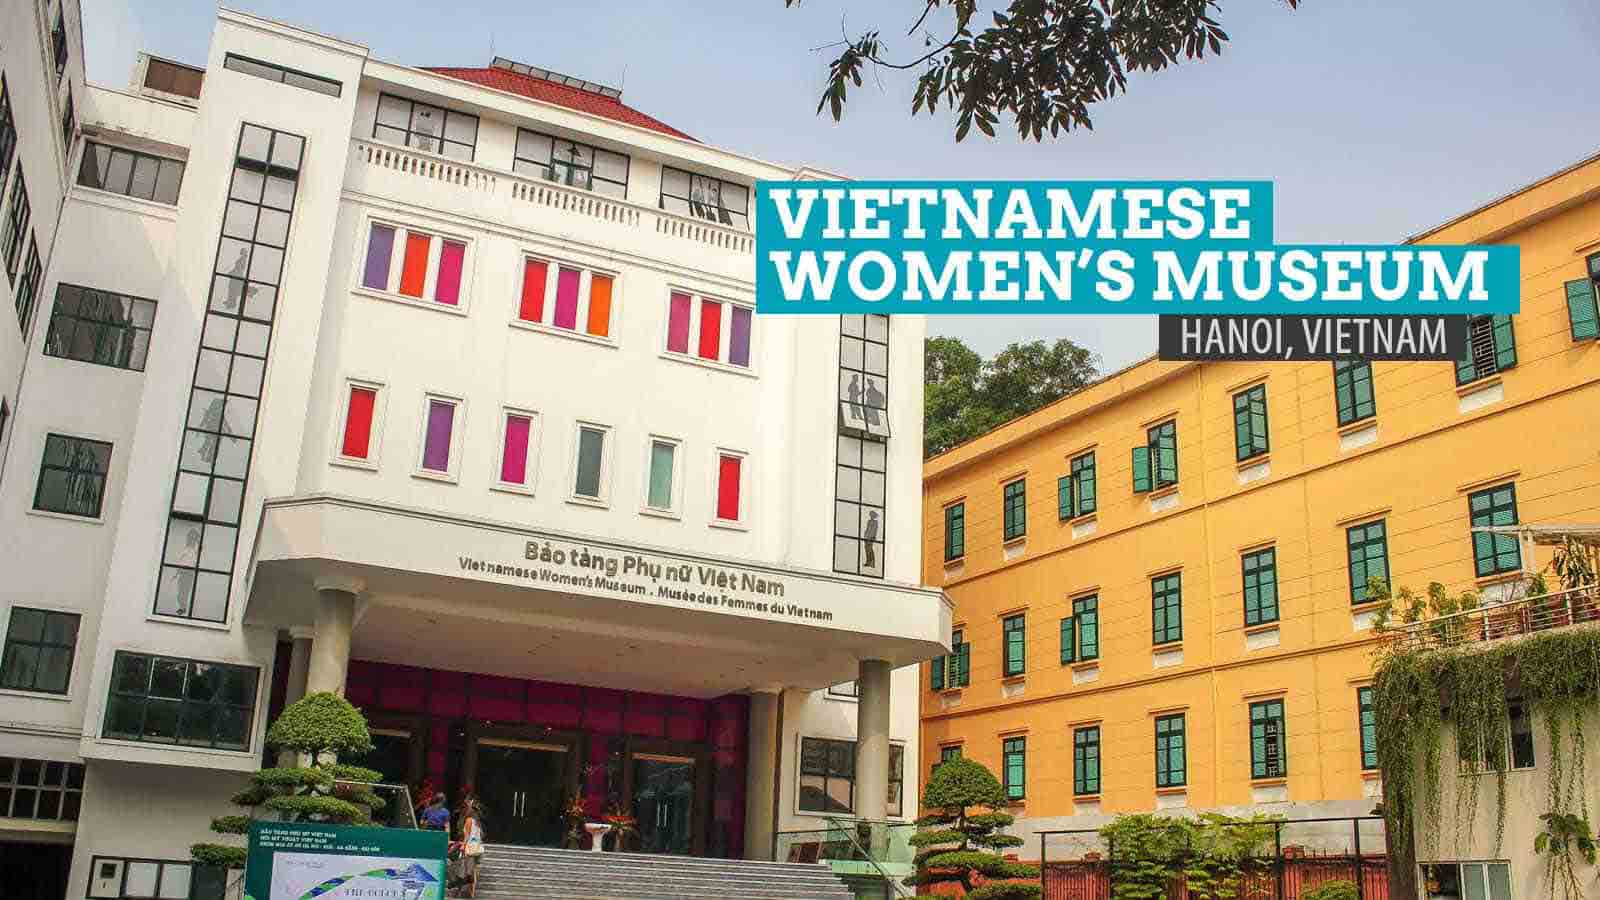 This excellent modern museum showcases the roles of women in Vietnamese society and culture